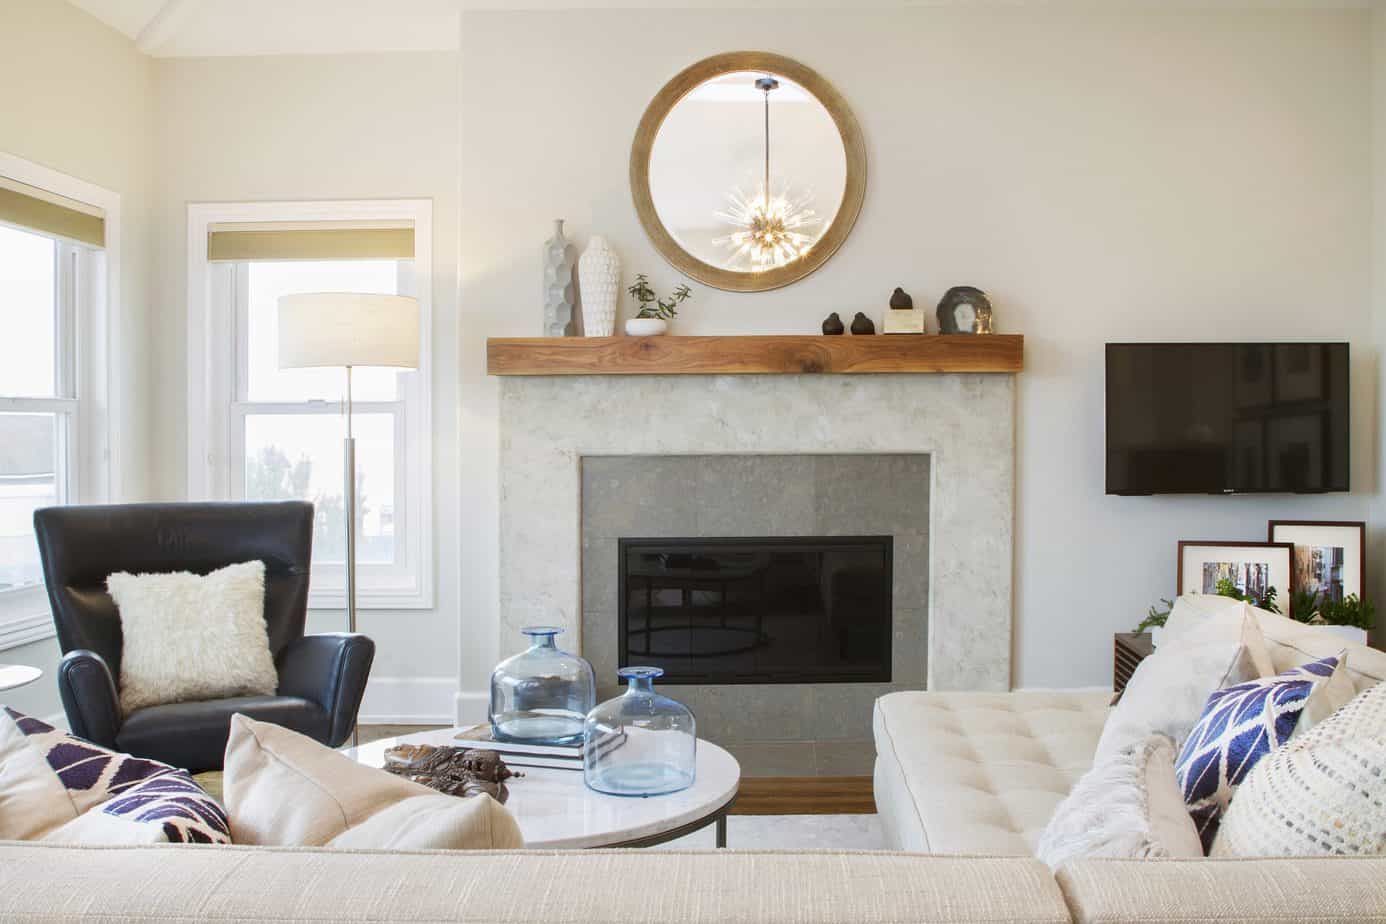 Modern Coastal Redondo Beach living room fireplace design white plaster and wooden mantle with decorative mirror above and side chair. Manhattan Beach modern coastal home